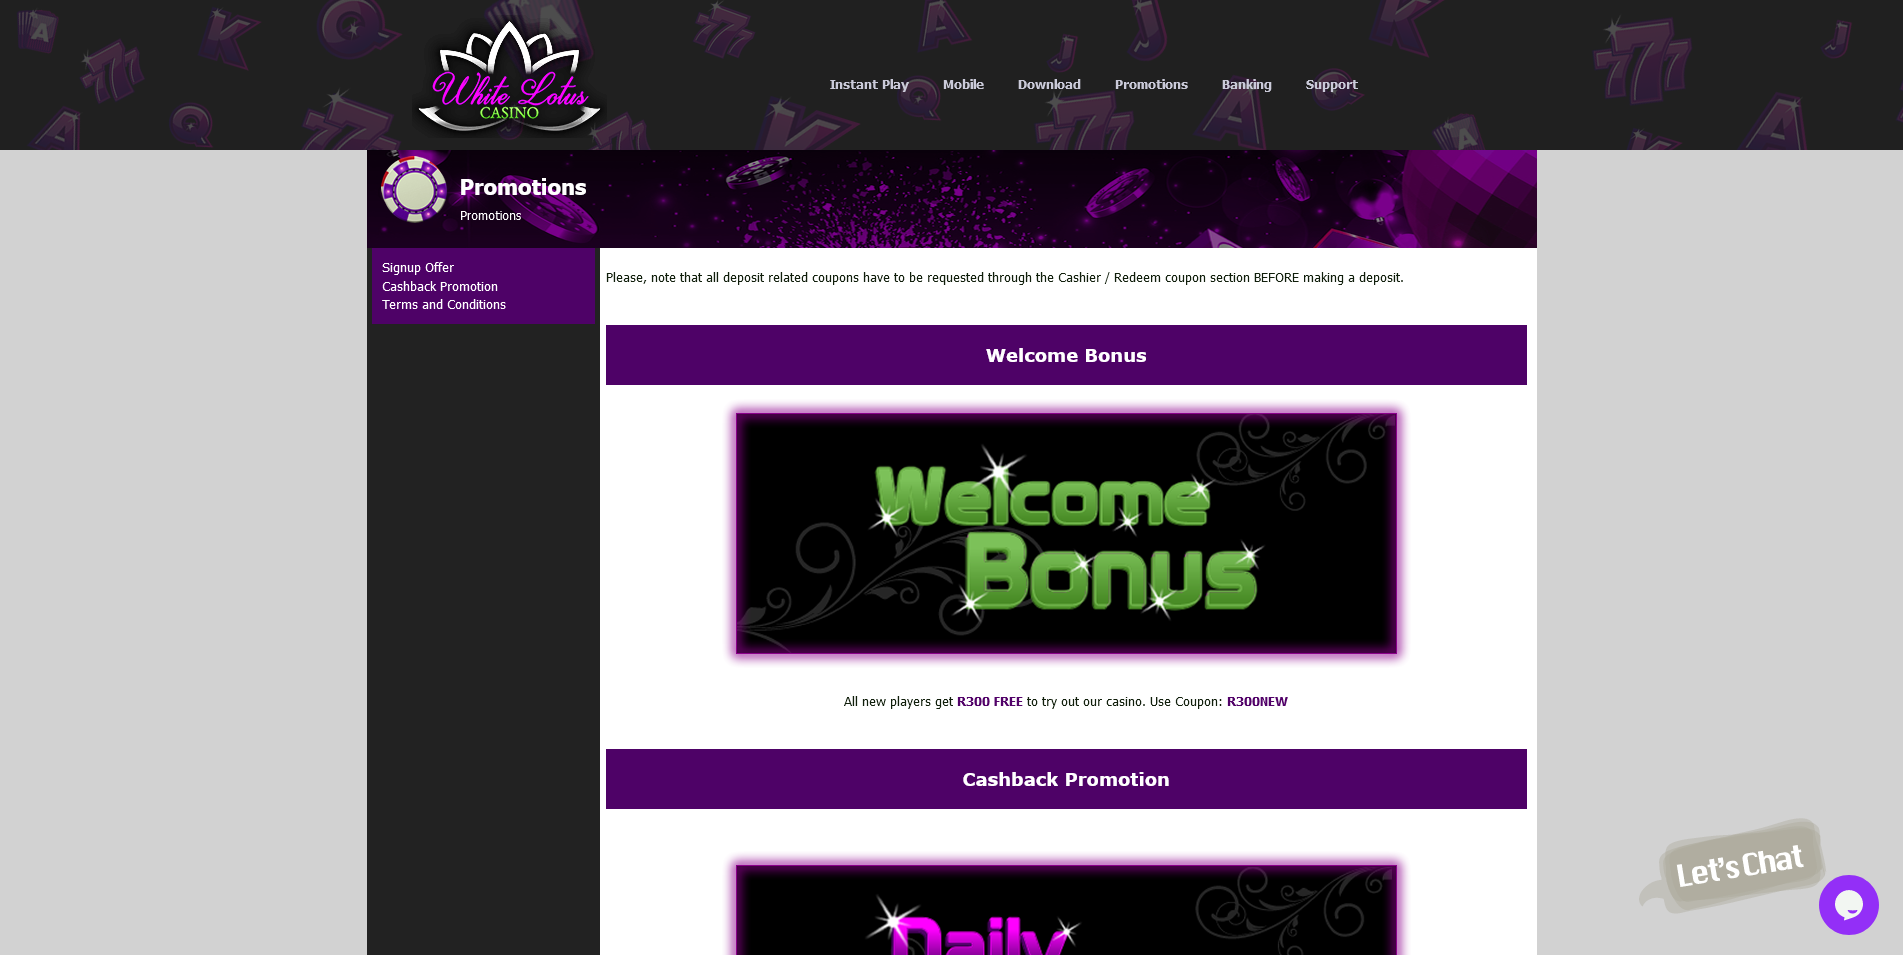 Screenshot of Bonuses and Promotions Page on White Lotus Casino site